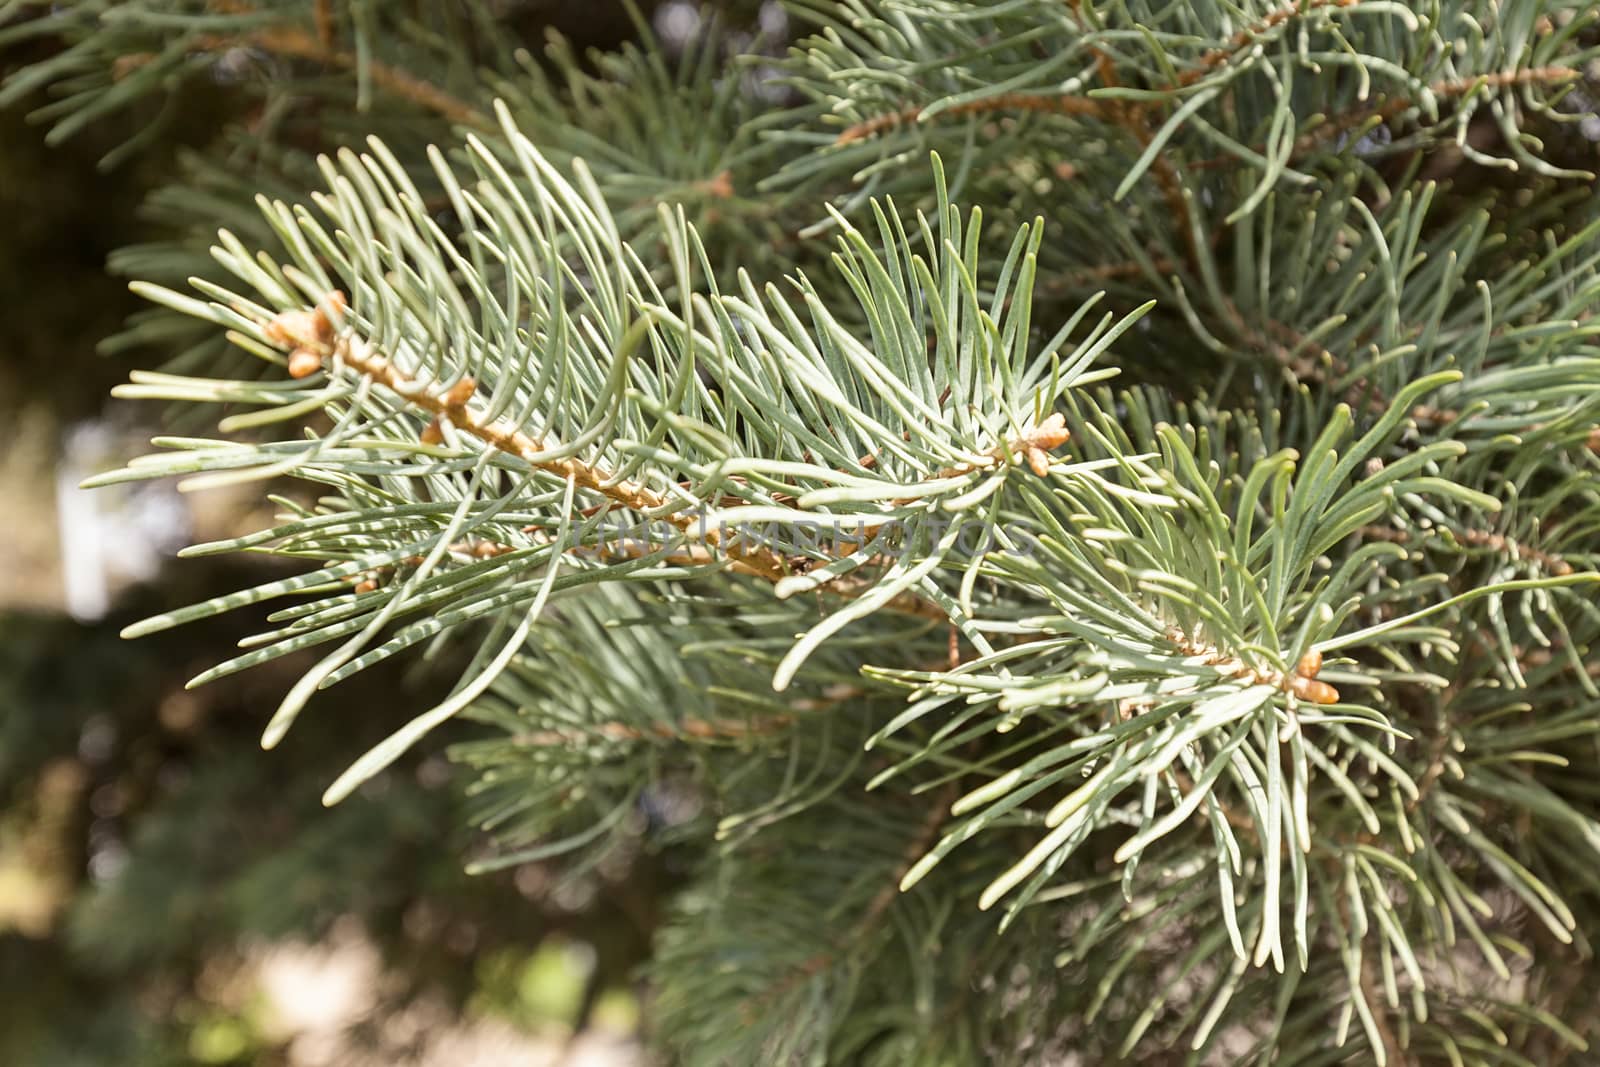 white pine branches, note shallow depth of field